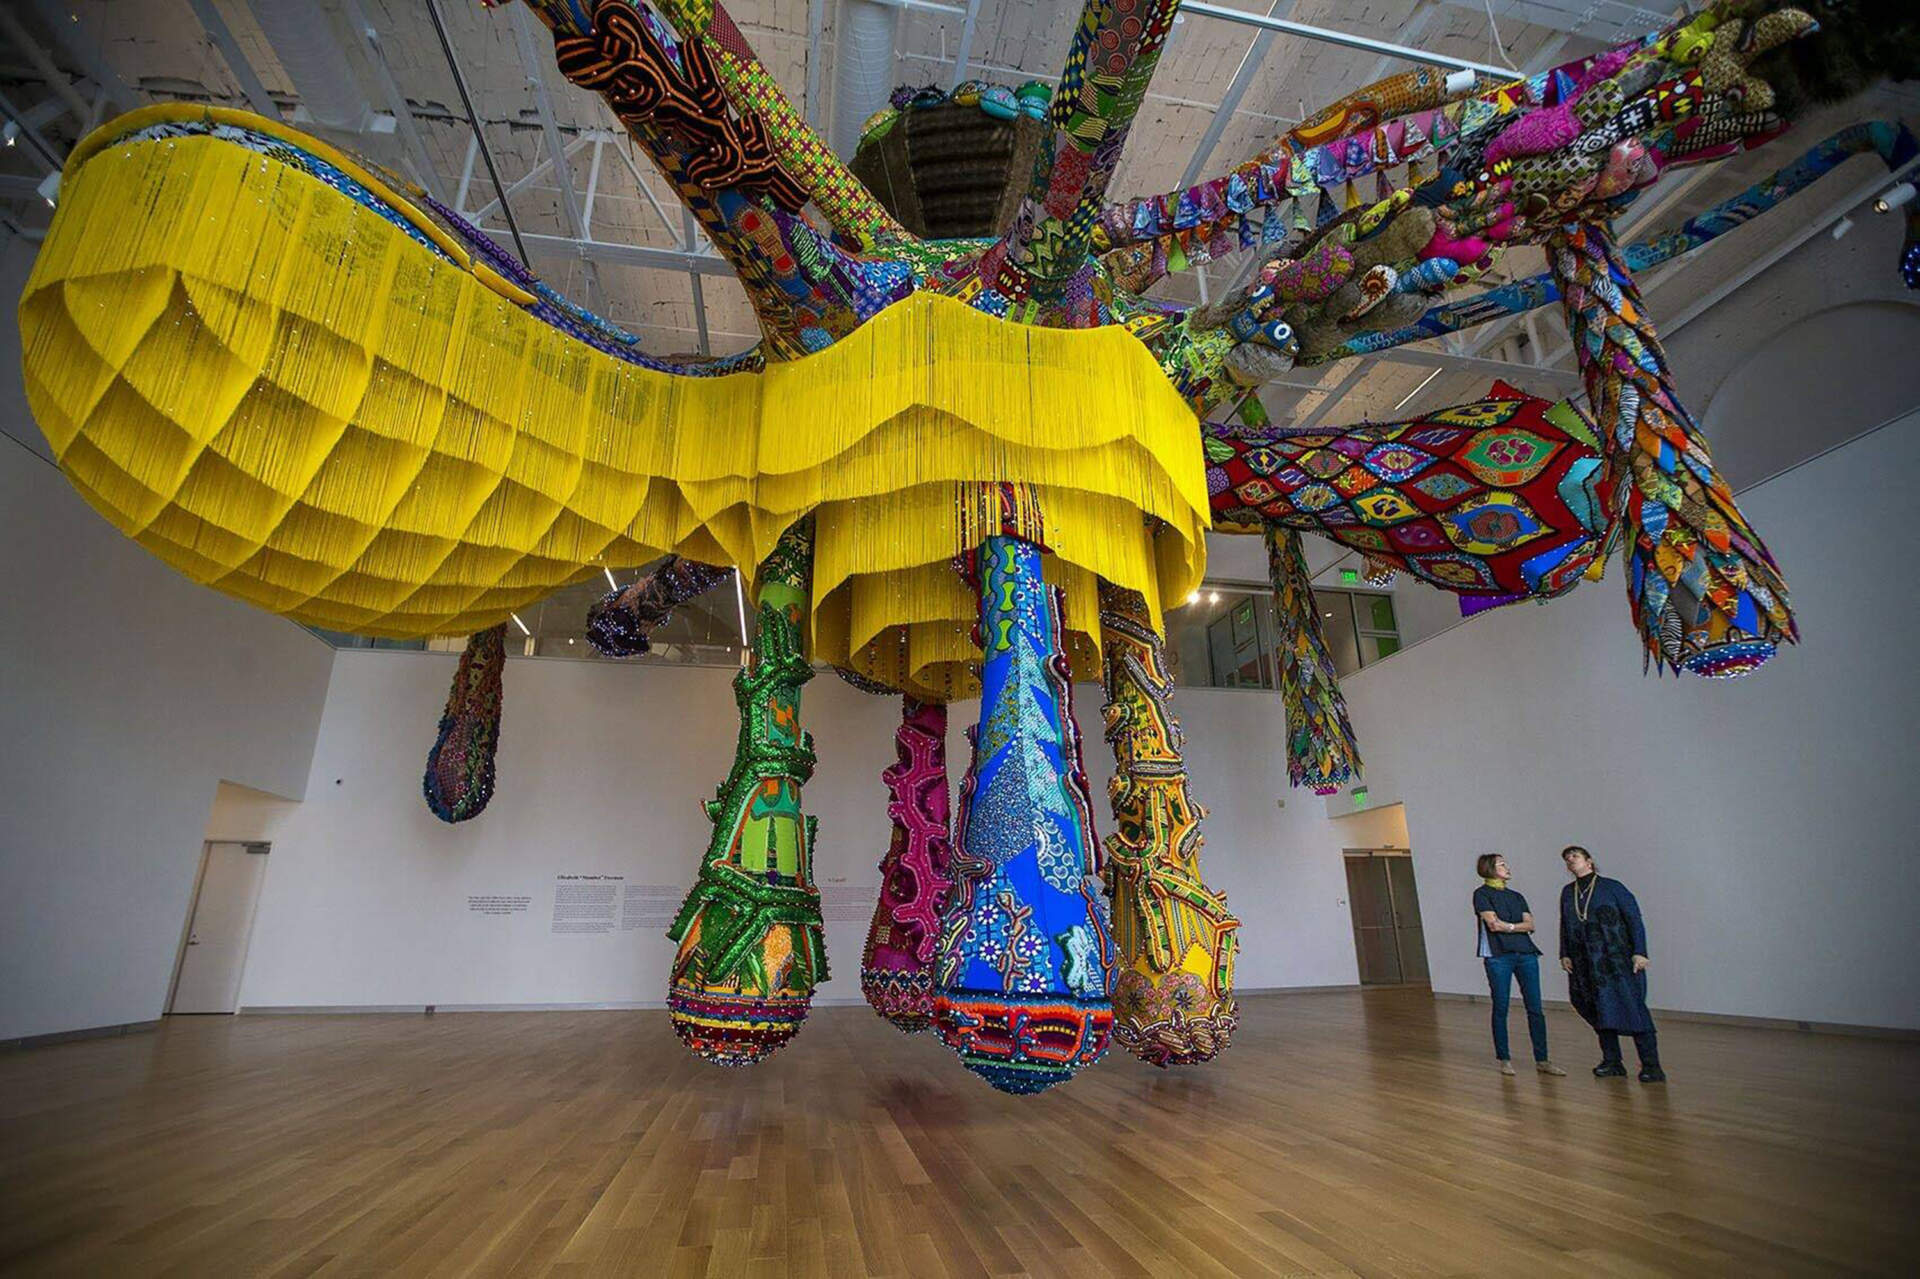 The first installation at MAAM when it opened in 2020 was Joana Vasconcelos' series of Valkyries. The museum has rotating exhibitions of contemporary artists. (Jesse Costa/WBUR)